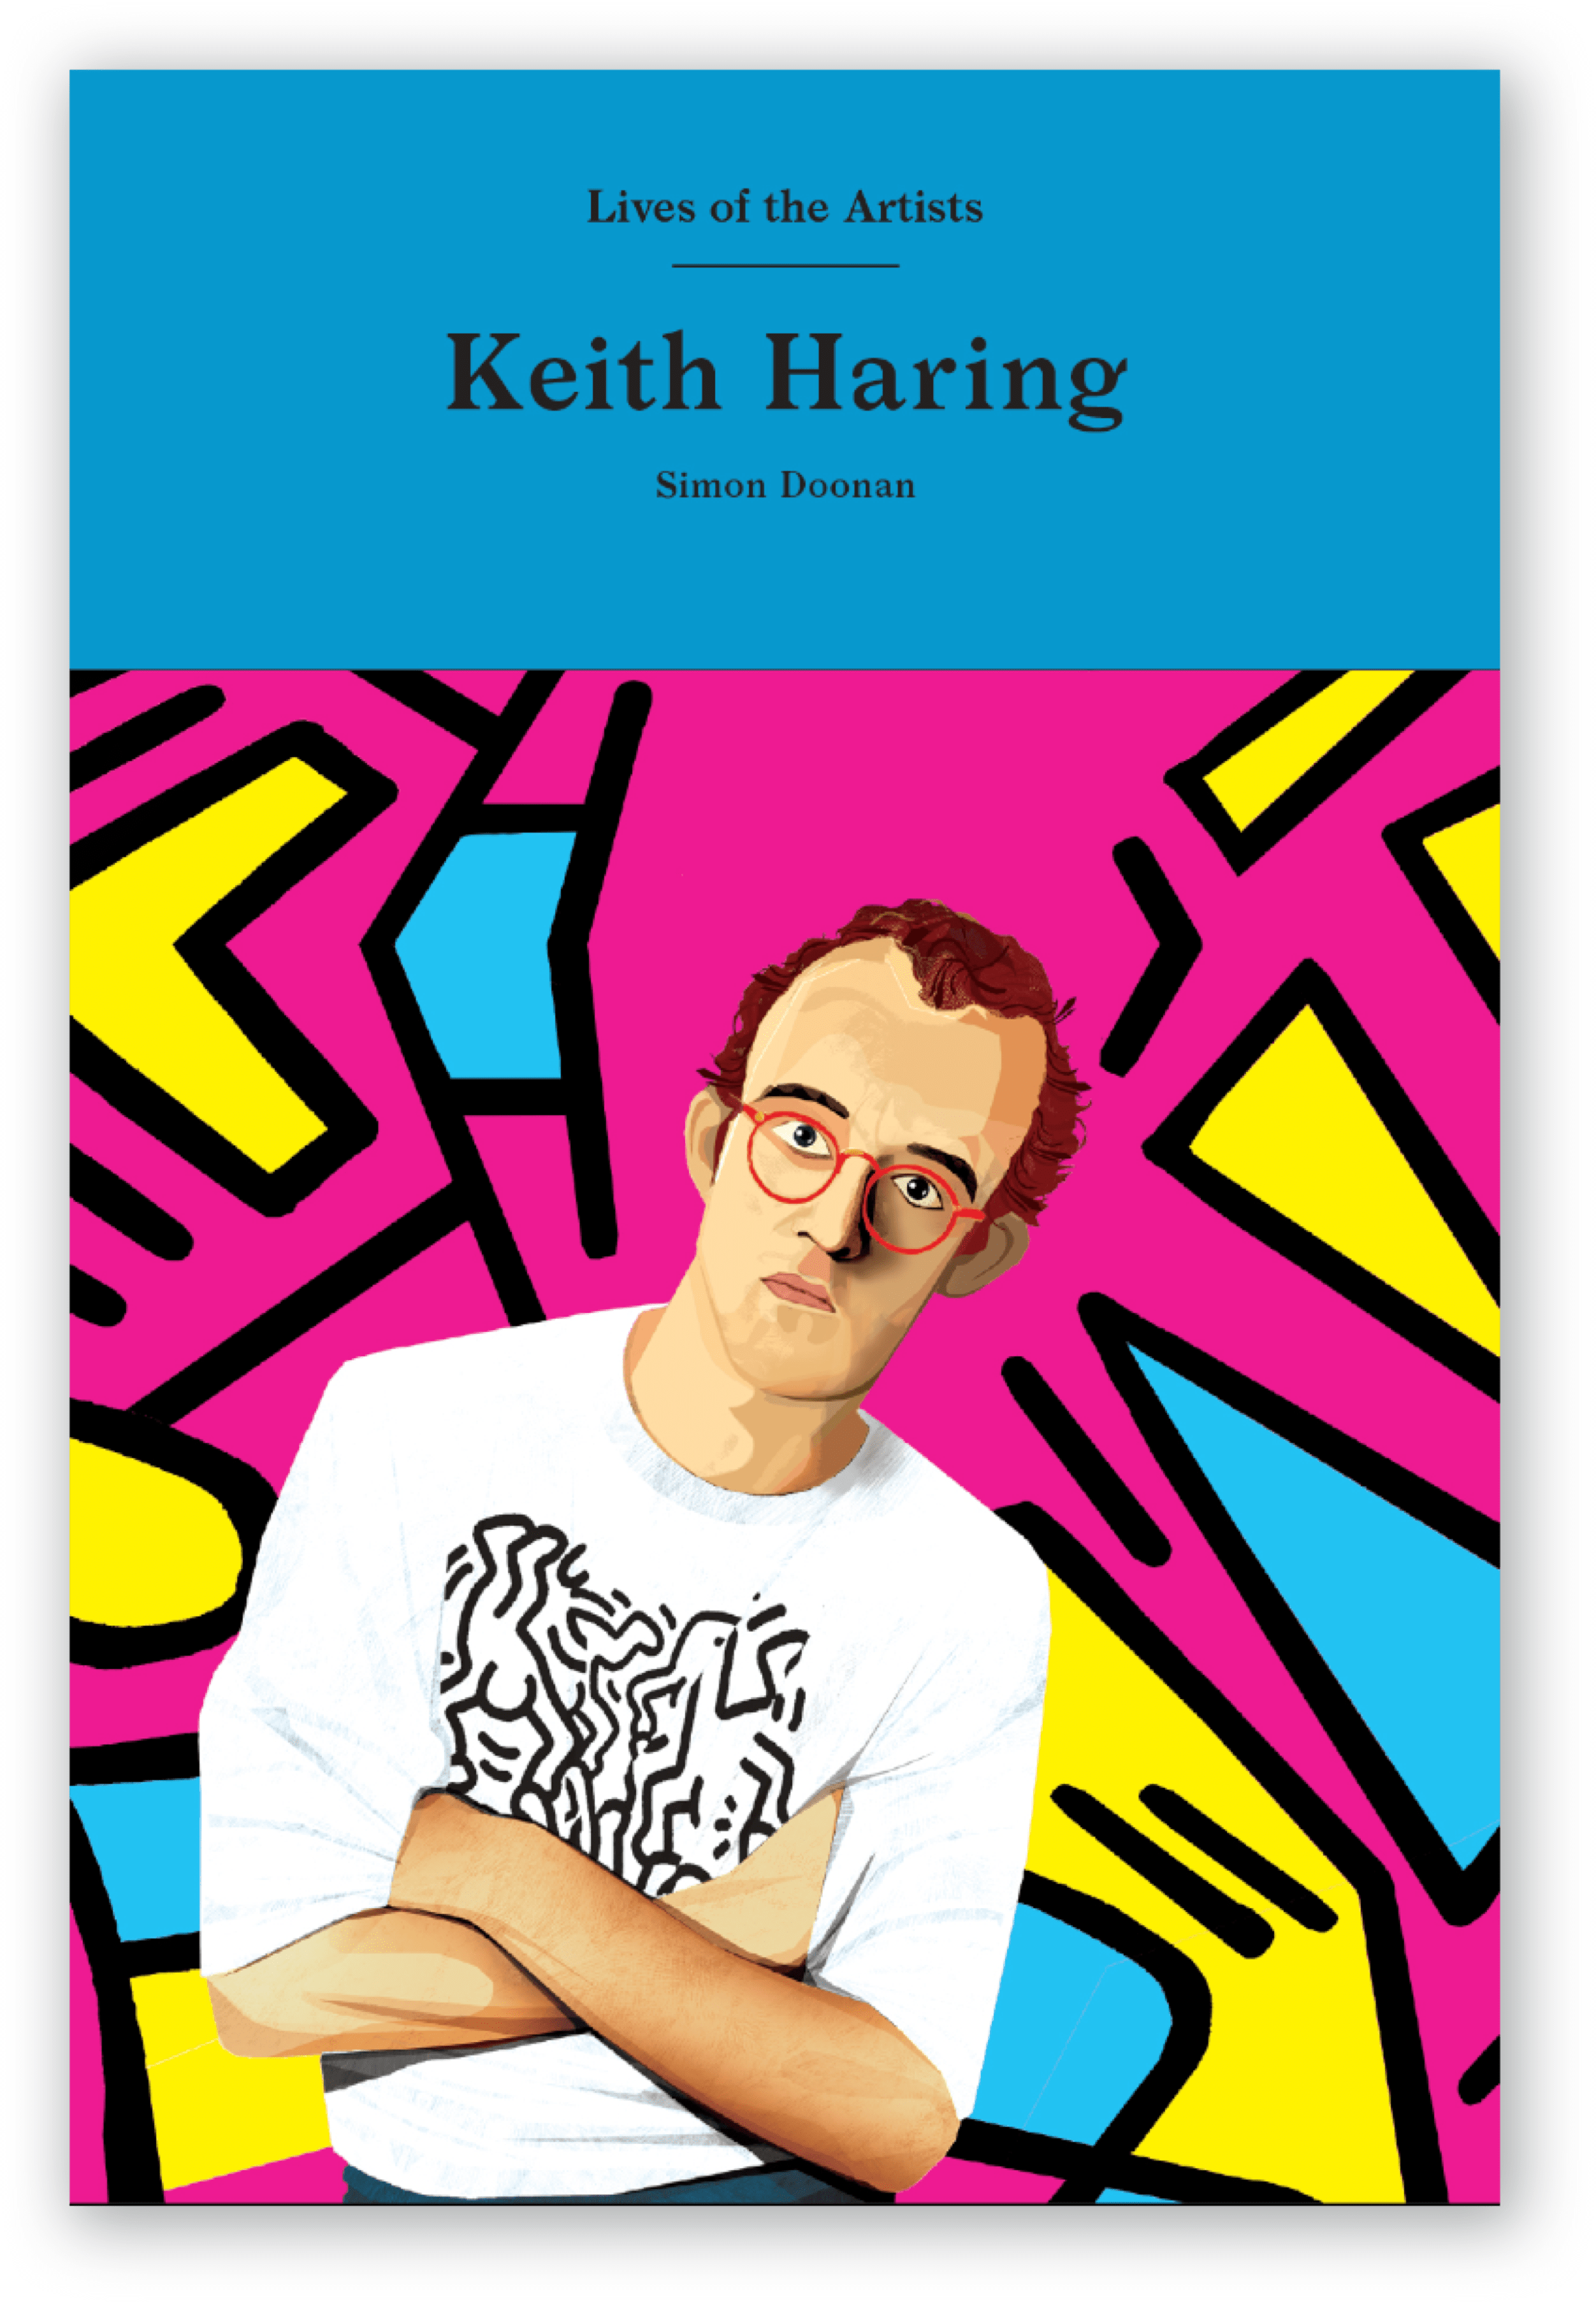 Lives of Artists: Keith Haring by Simon Doonan